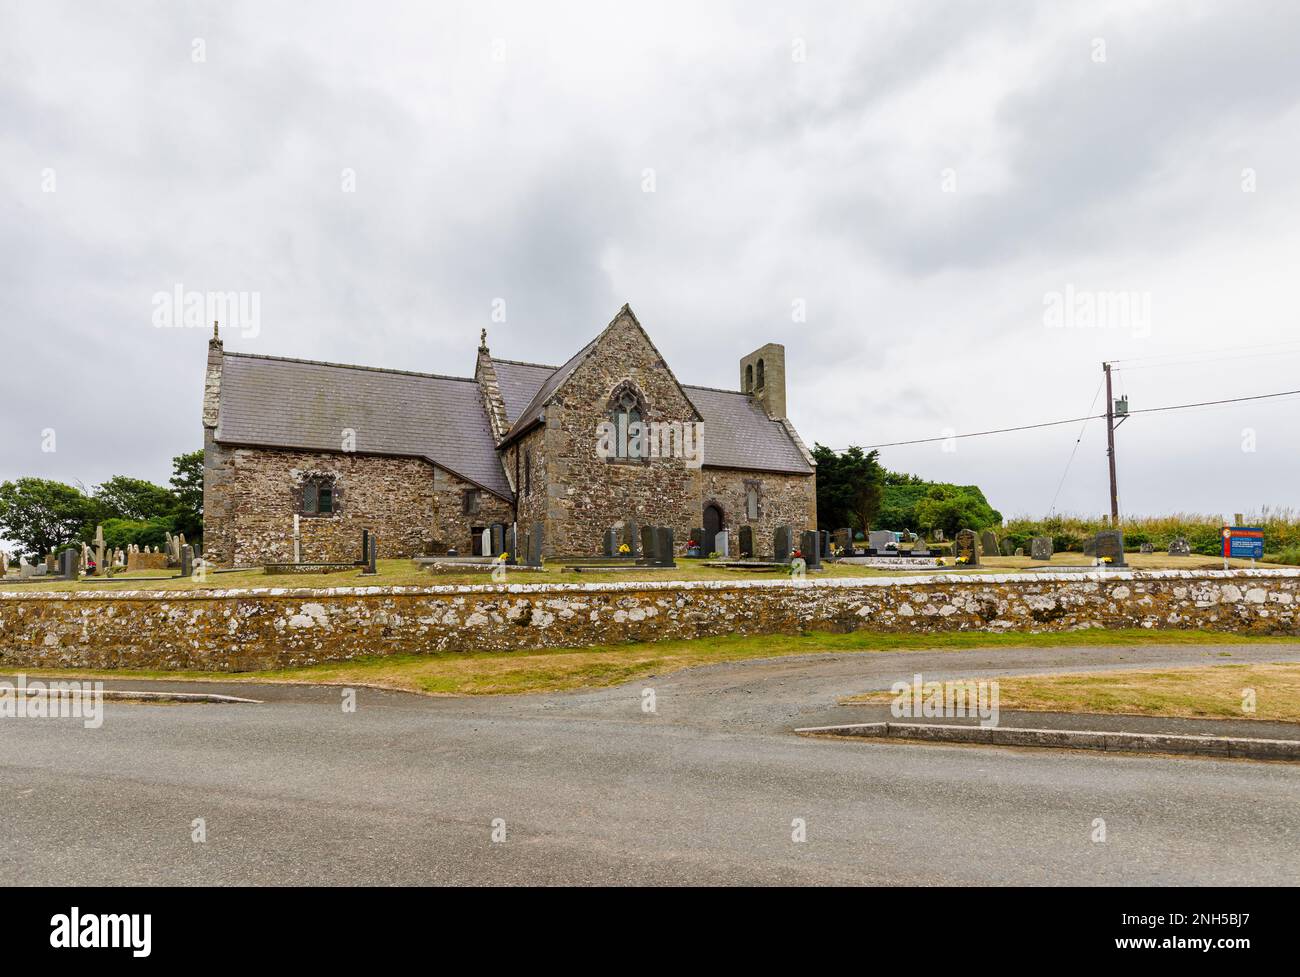 The church of St Peter the Fisherman in Marloes, a small village on the Marloes Peninsula in the Pembrokeshire Coast National Park, west Wales Stock Photo